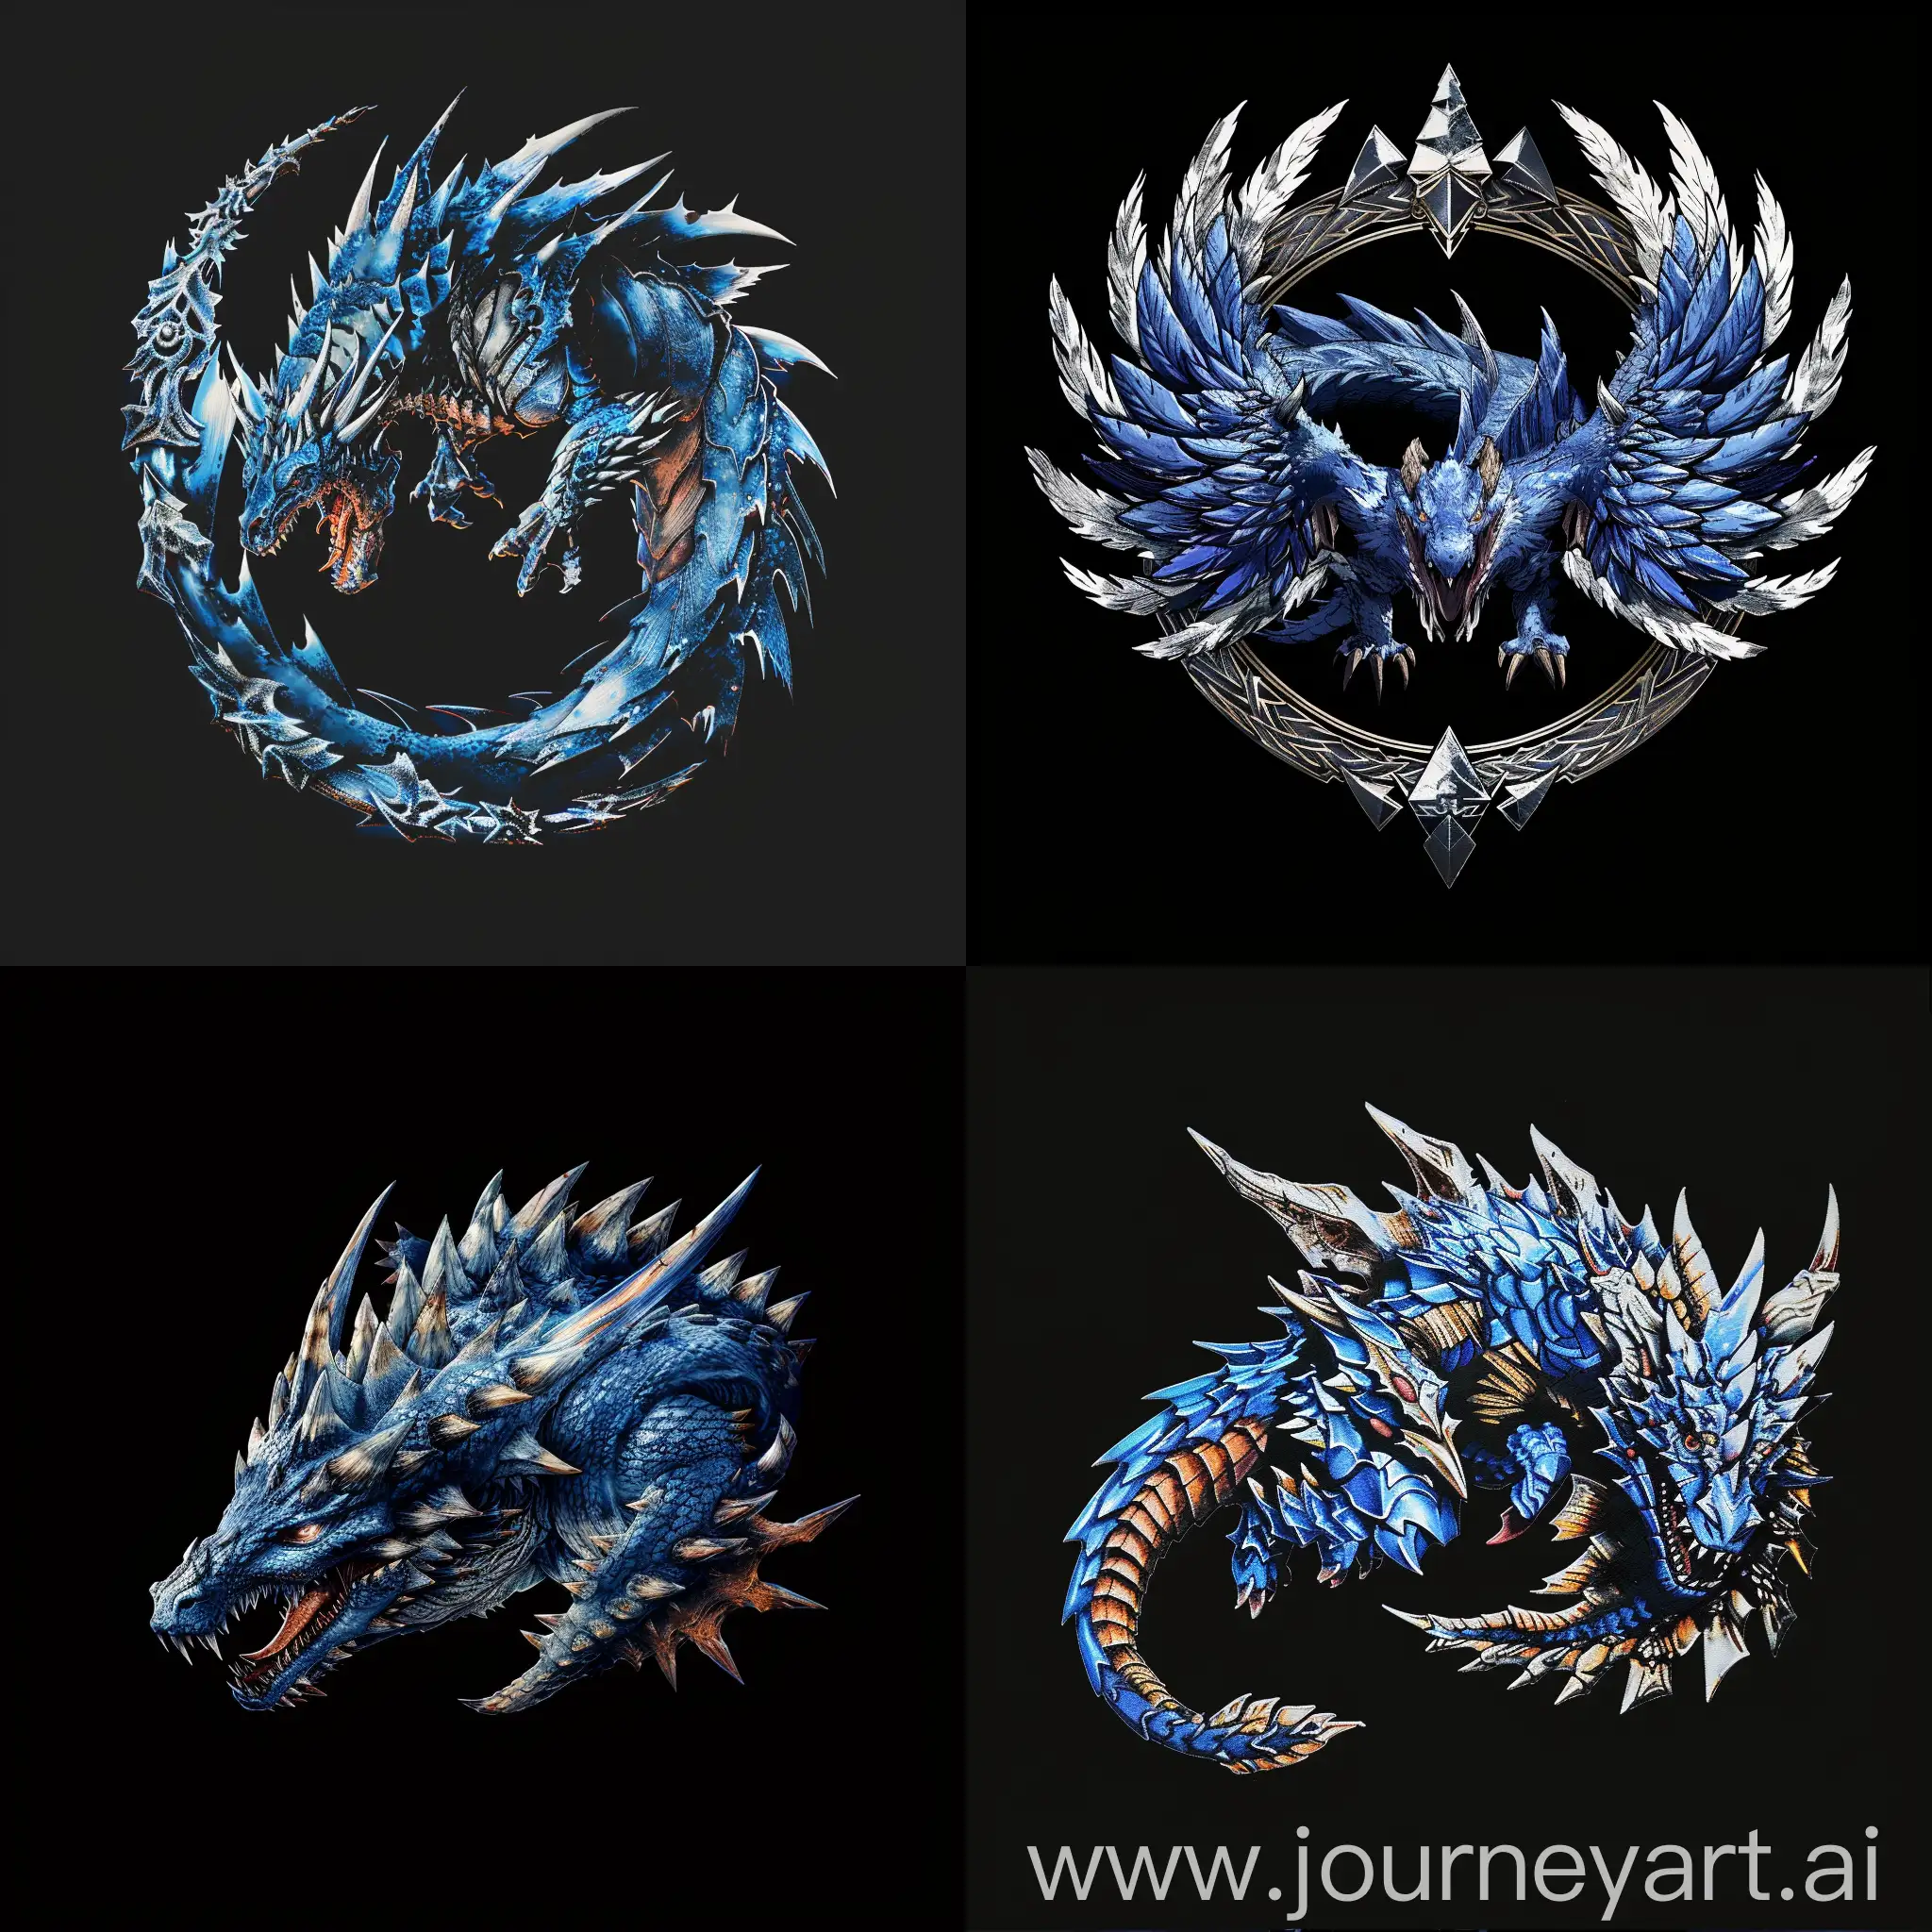 The logo on which the blue Teostra from the game "Monster hunter: World" is depicted. Background: black. View: from the side